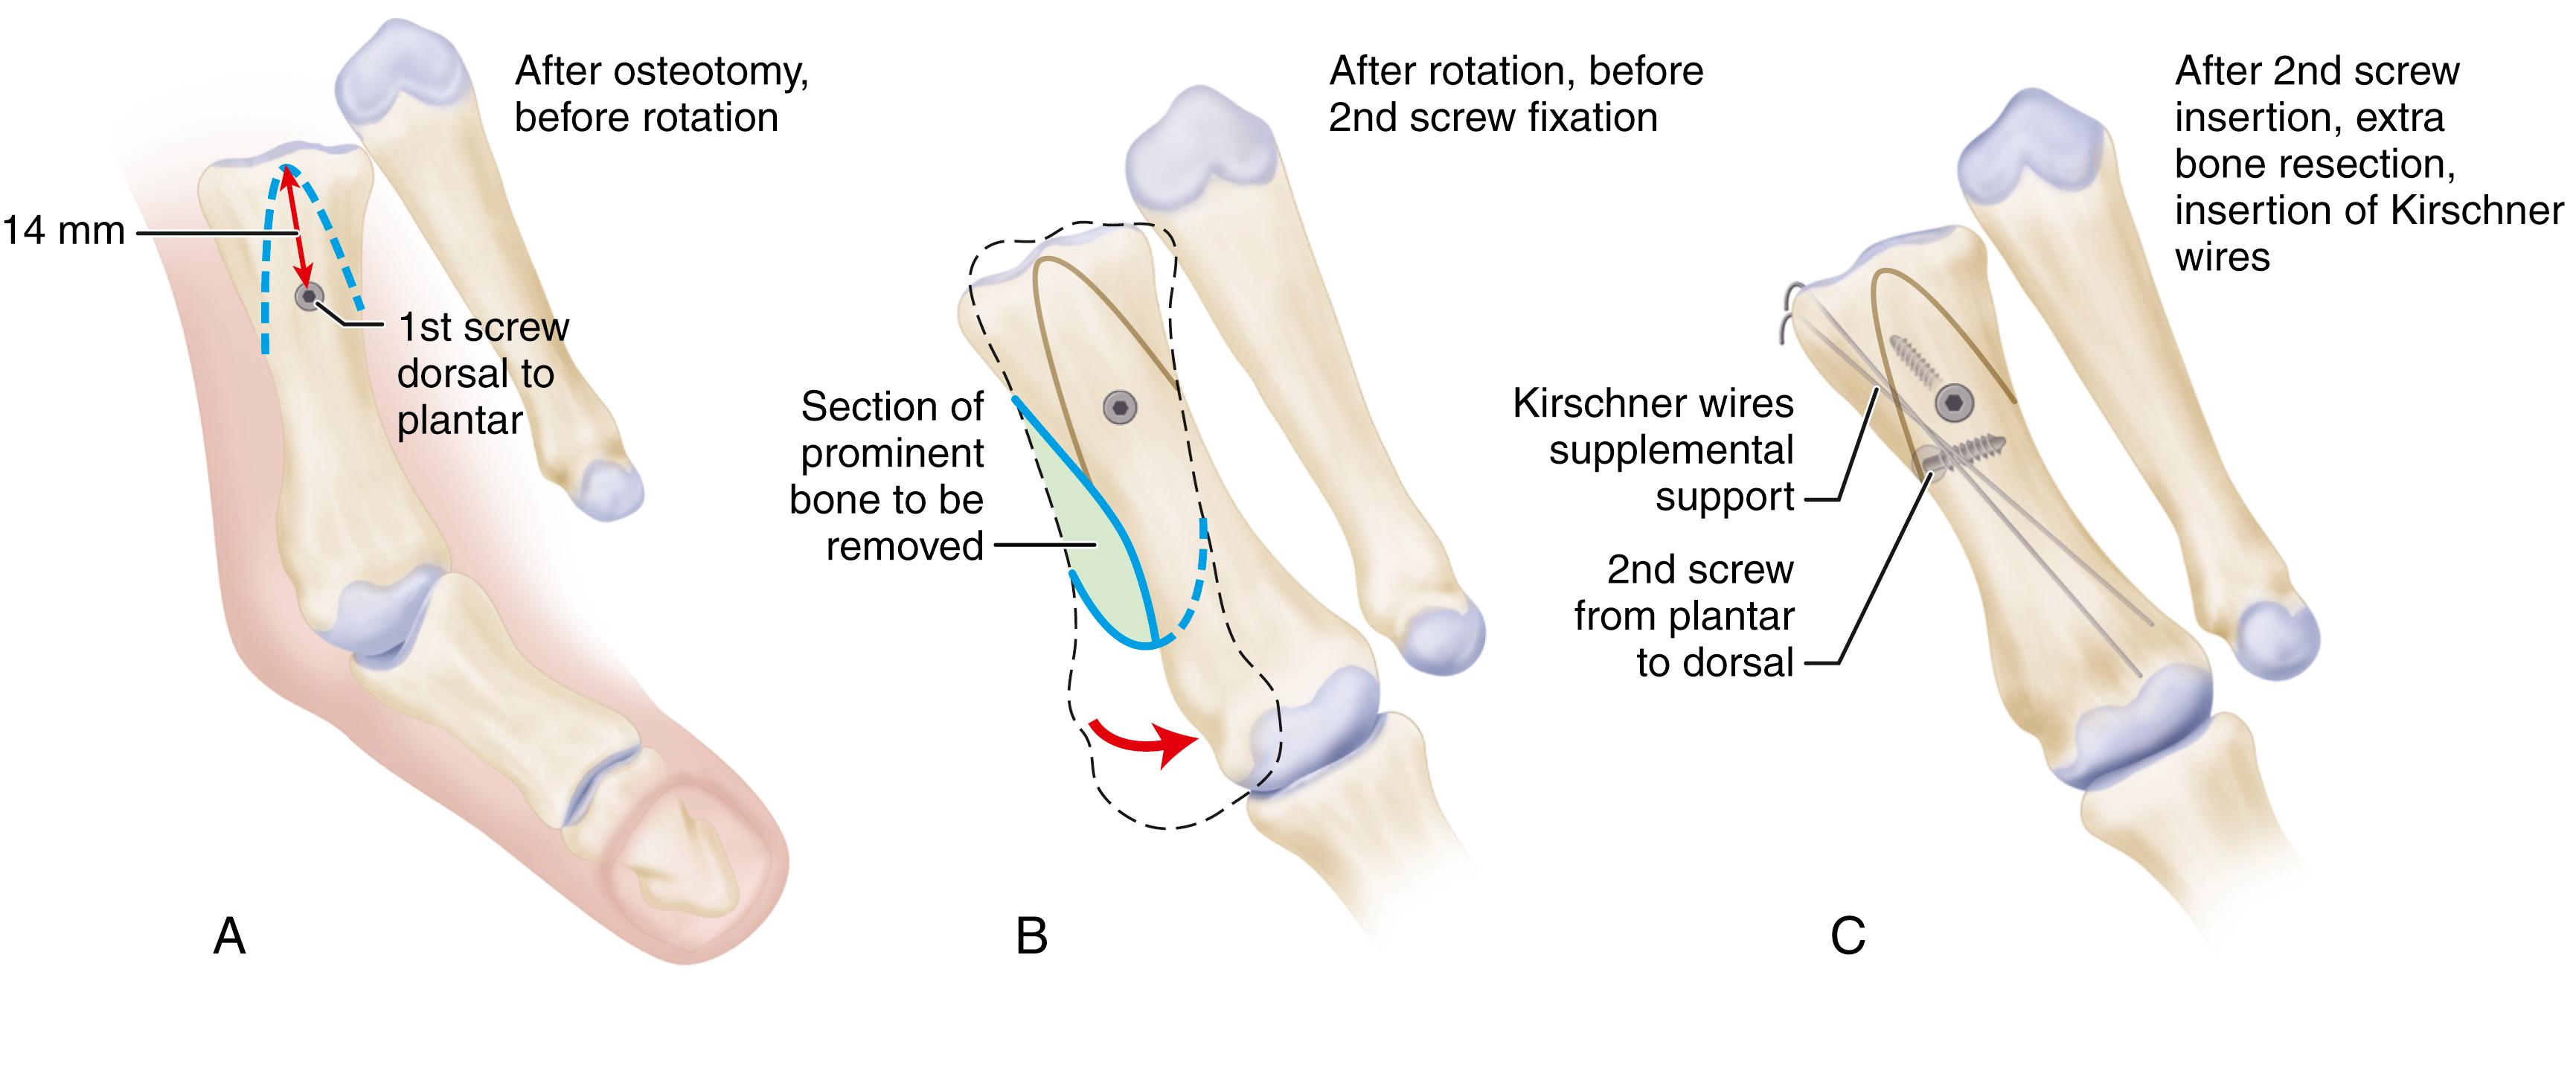 FIGURE 82.55, Ludloff osteotomy. A, Placement of first screw after osteotomy and before rotation of distal fragment. B, Rotation of distal fragment. C, Placement of supplementary Kirschner wires after placement of second screw and resection of bone. (From Schon LC, Dorn KJ, Jung HG: Clinical tip: stabilization of the proximal Ludloff osteotomy, Foot Ankle Int 26:579, 2005.) SEE TECHNIQUE 82.12 .